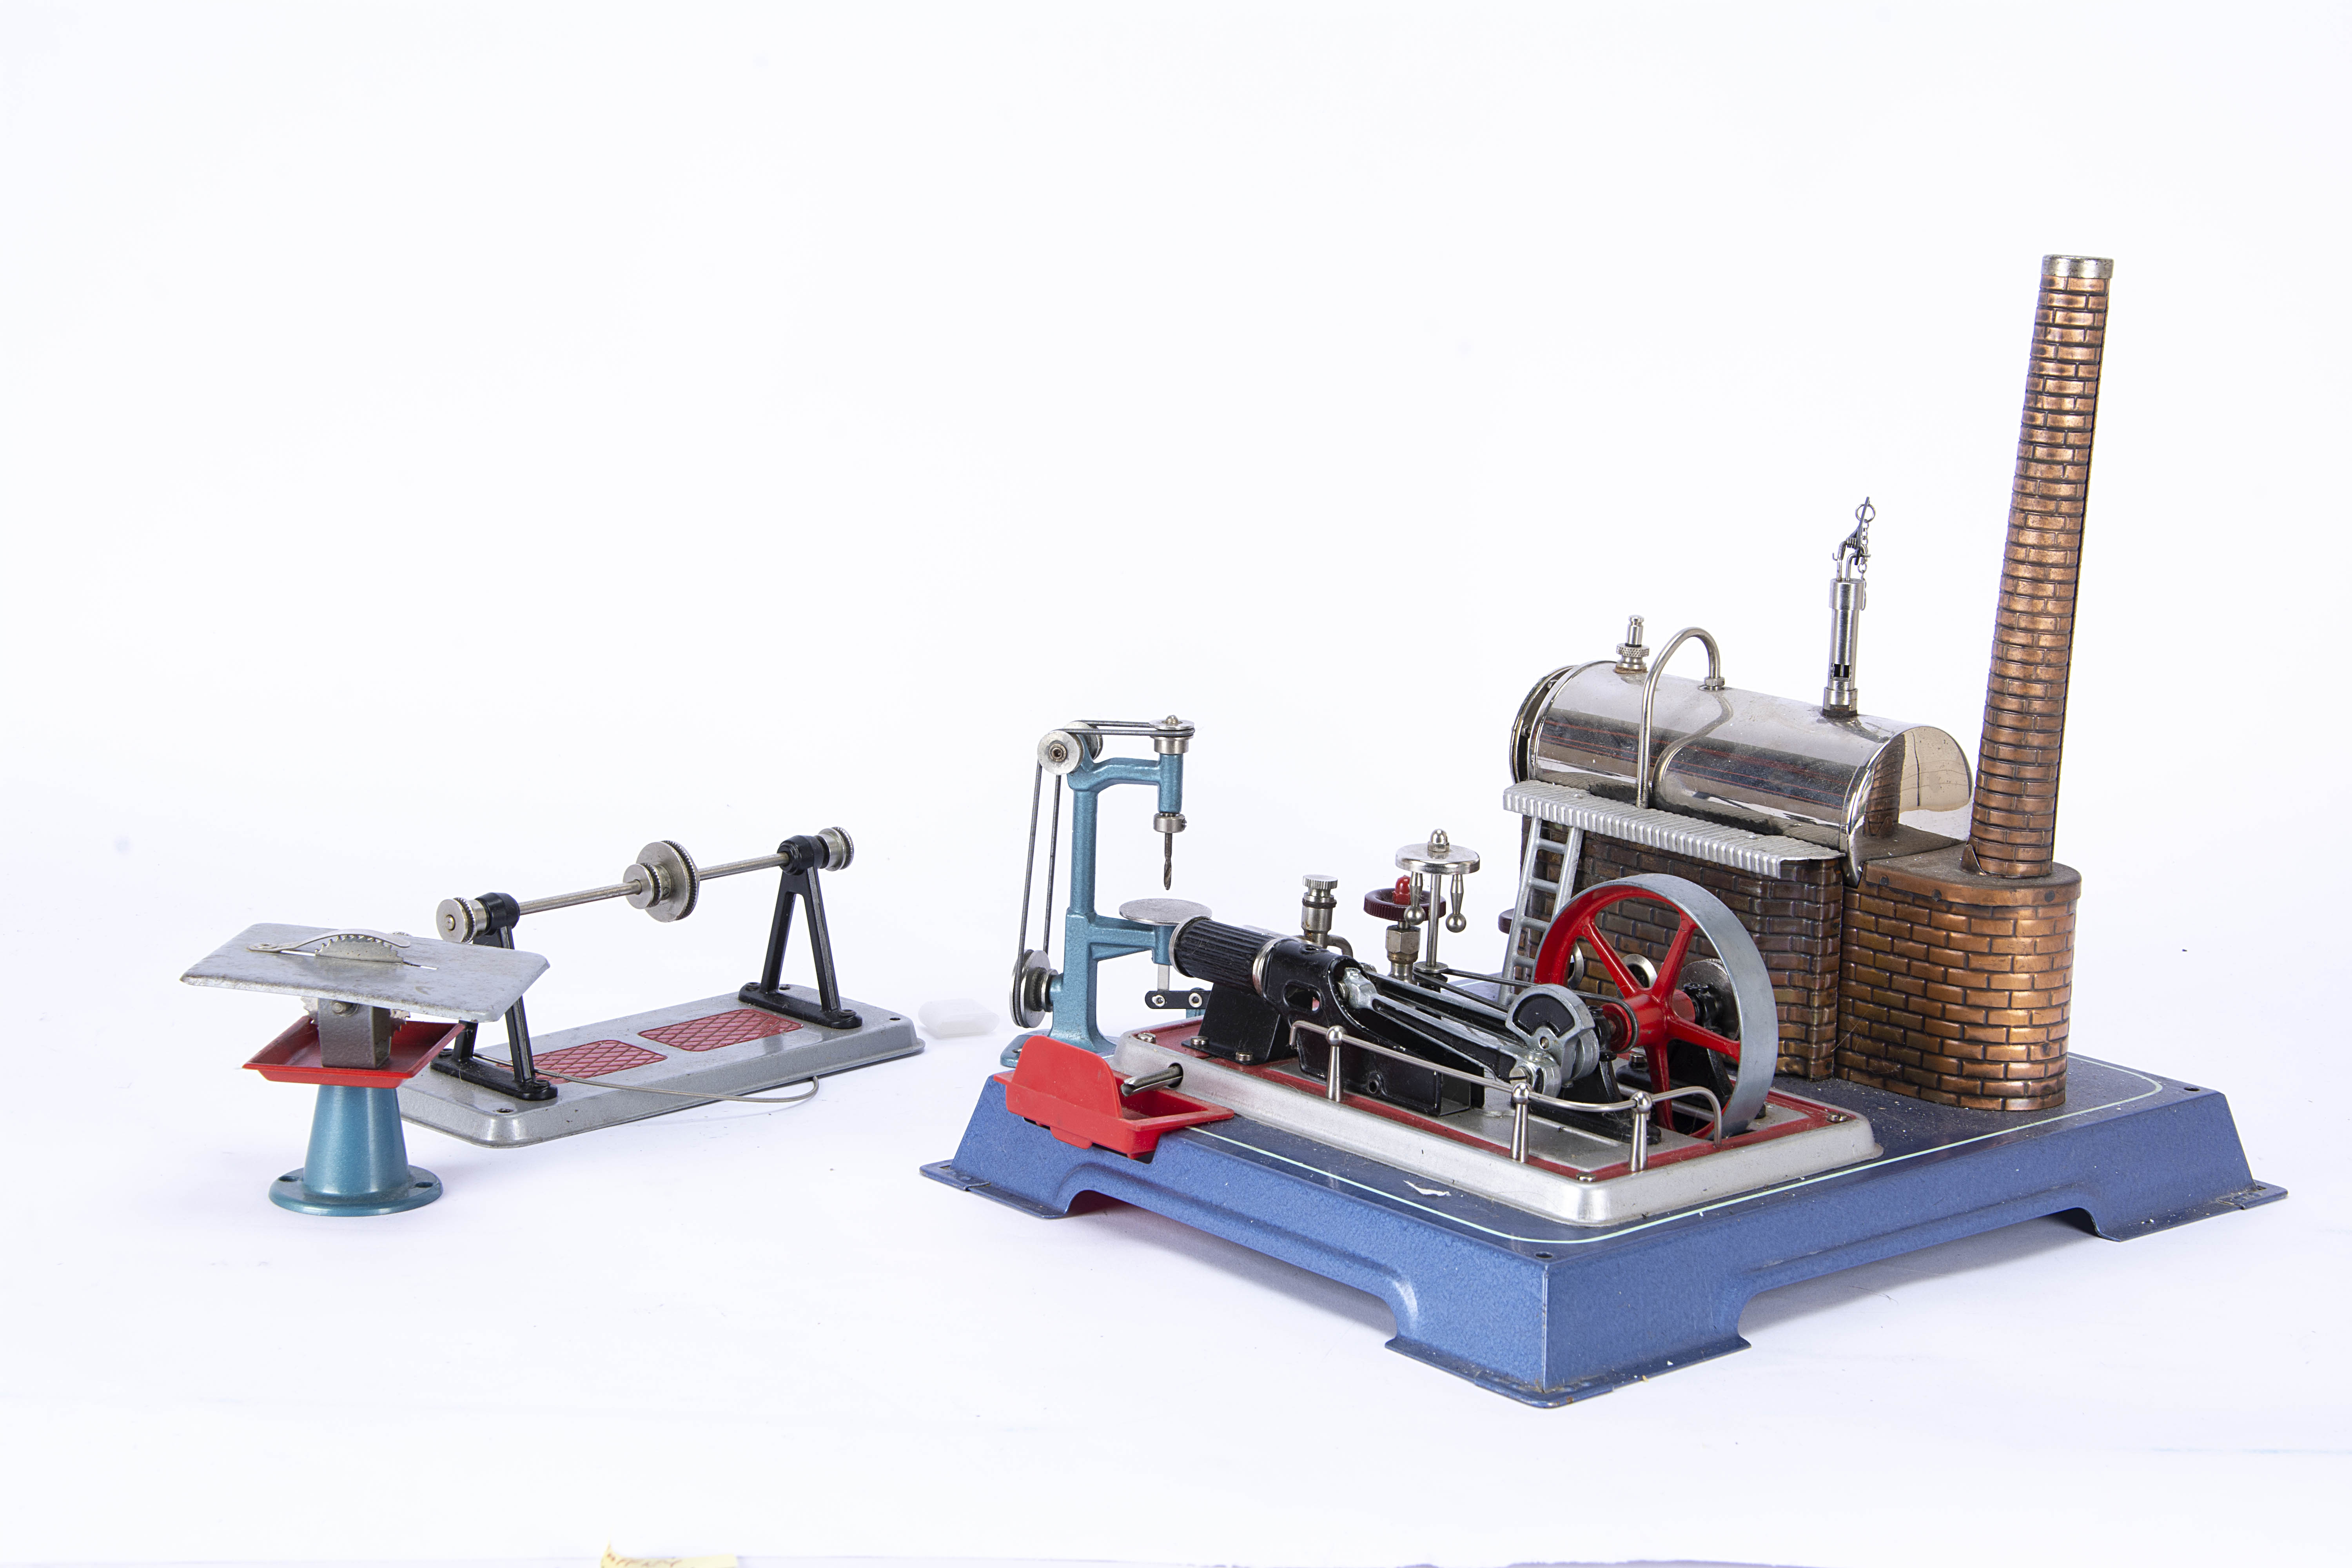 A Wilesco live steam tablet-fired Stationary Engine and Accessories, on blue base with red trim,